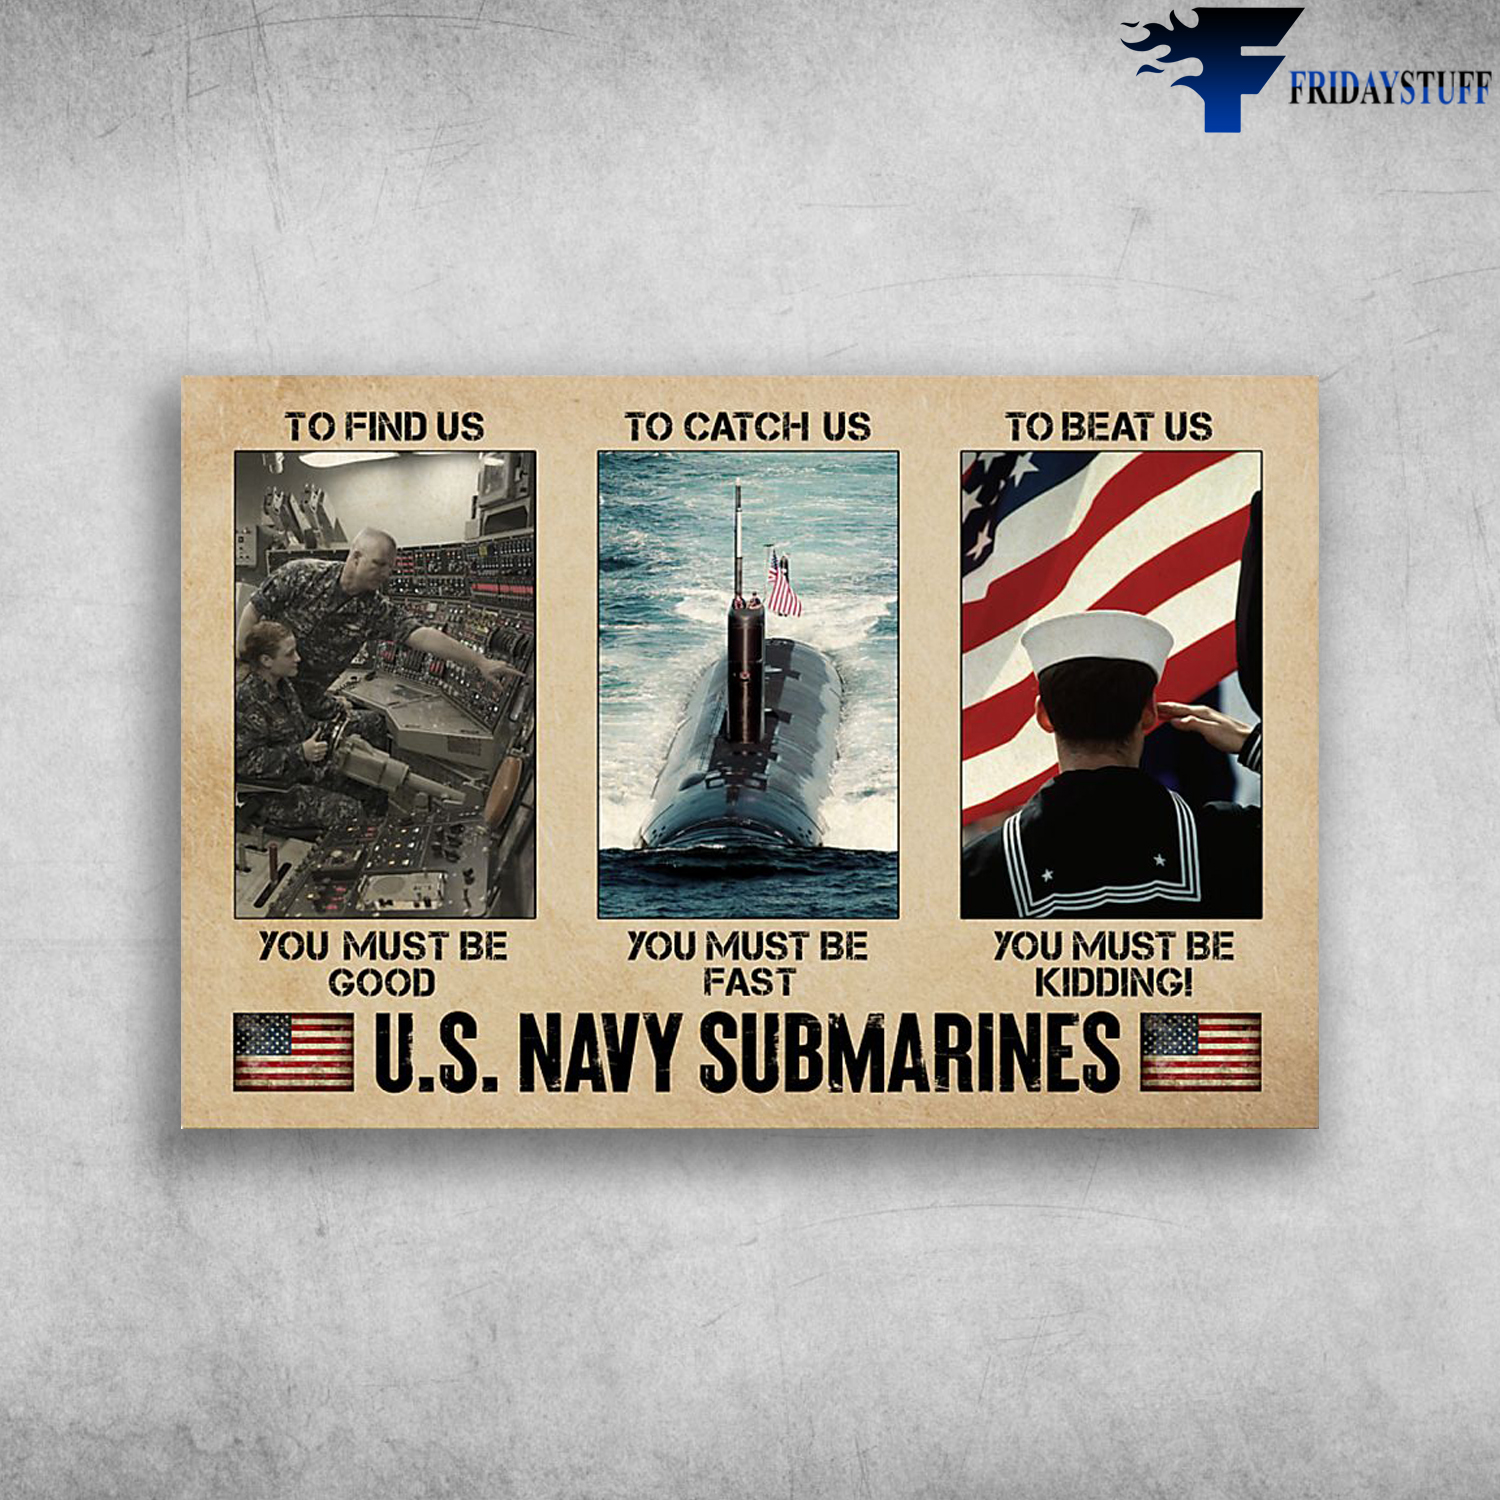 U.S. Navy Submarines - To Find Us, You Must be Goog, To Catch Us You Must Be Fast, To Beat Us, You Must Be Kindding